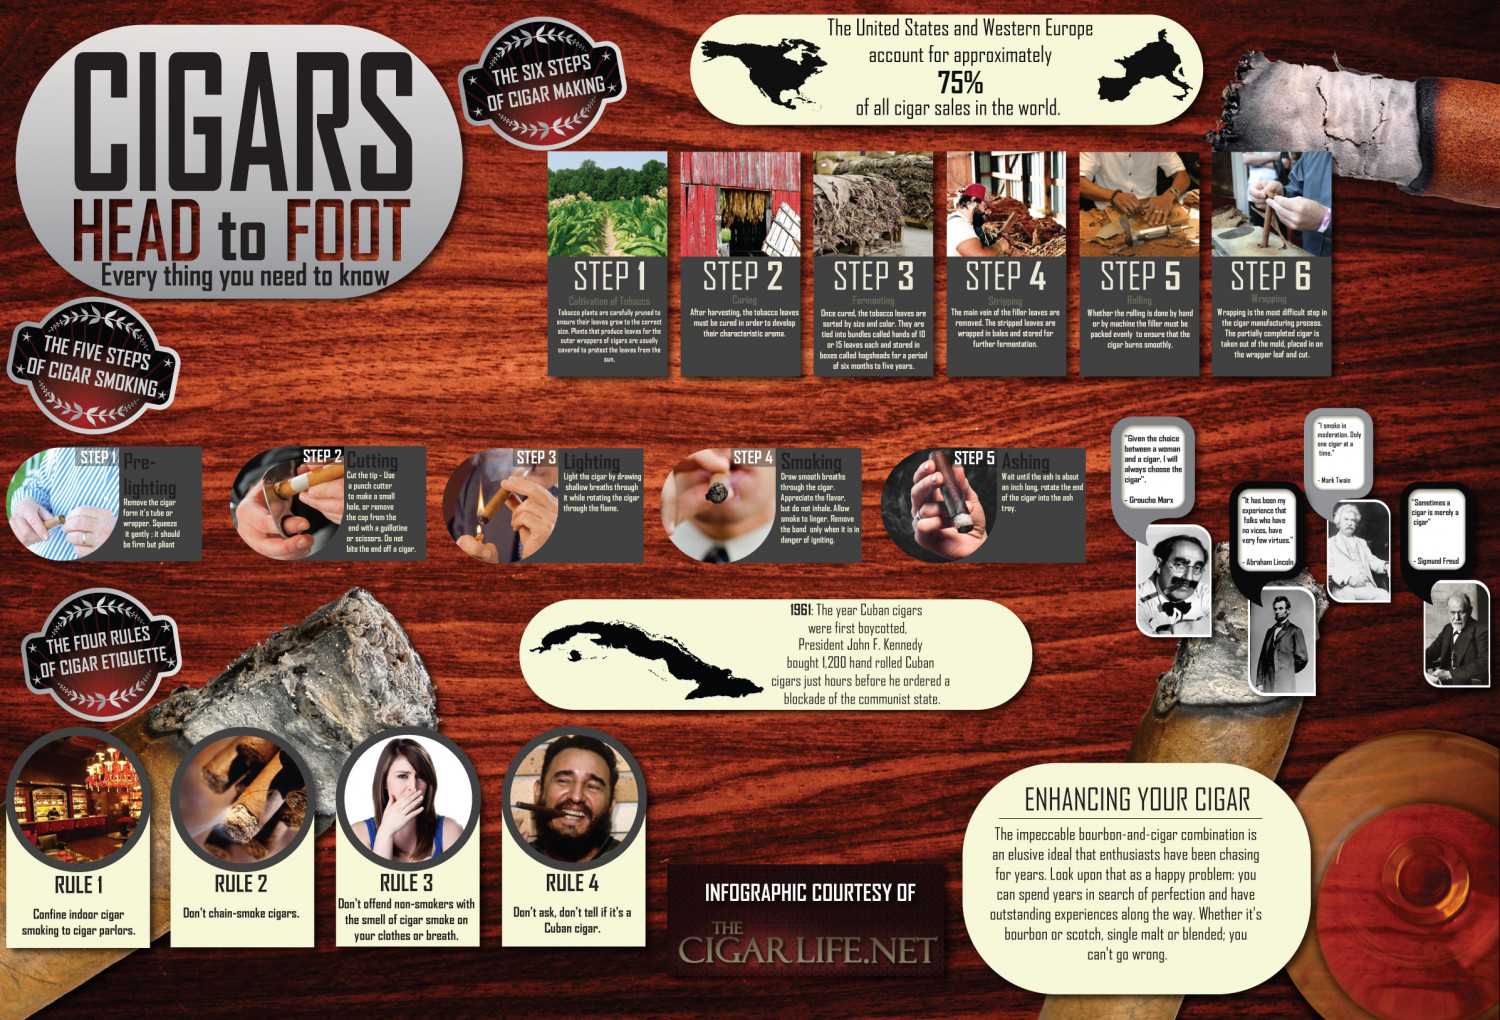 Cigars Head to Foot: Everything you need to know Infographic